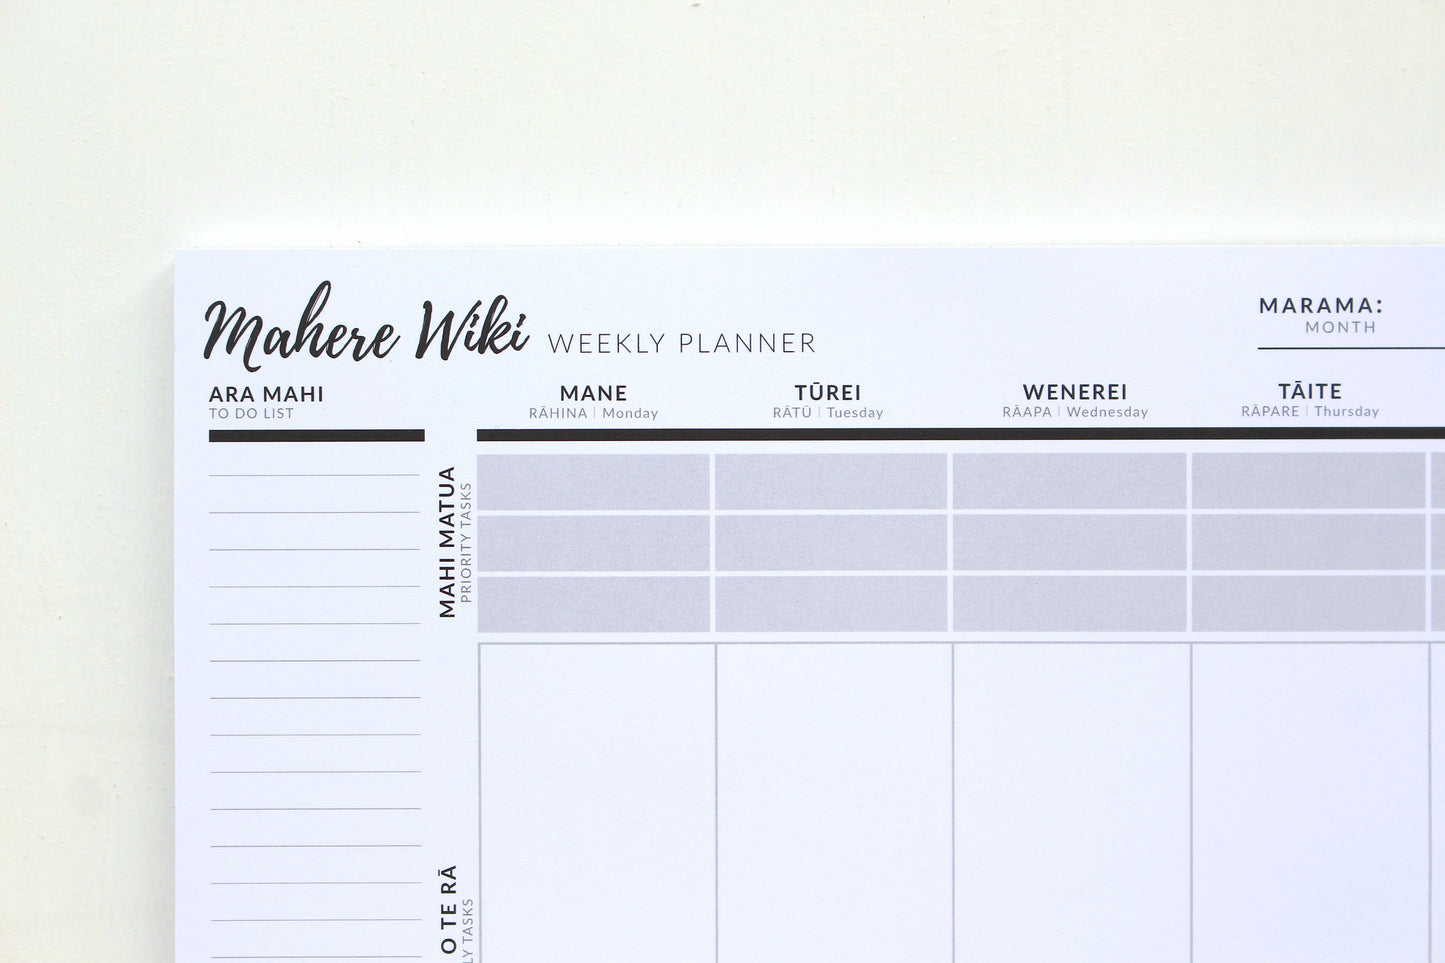 Weekly Planner Pad - Mahere Wiki